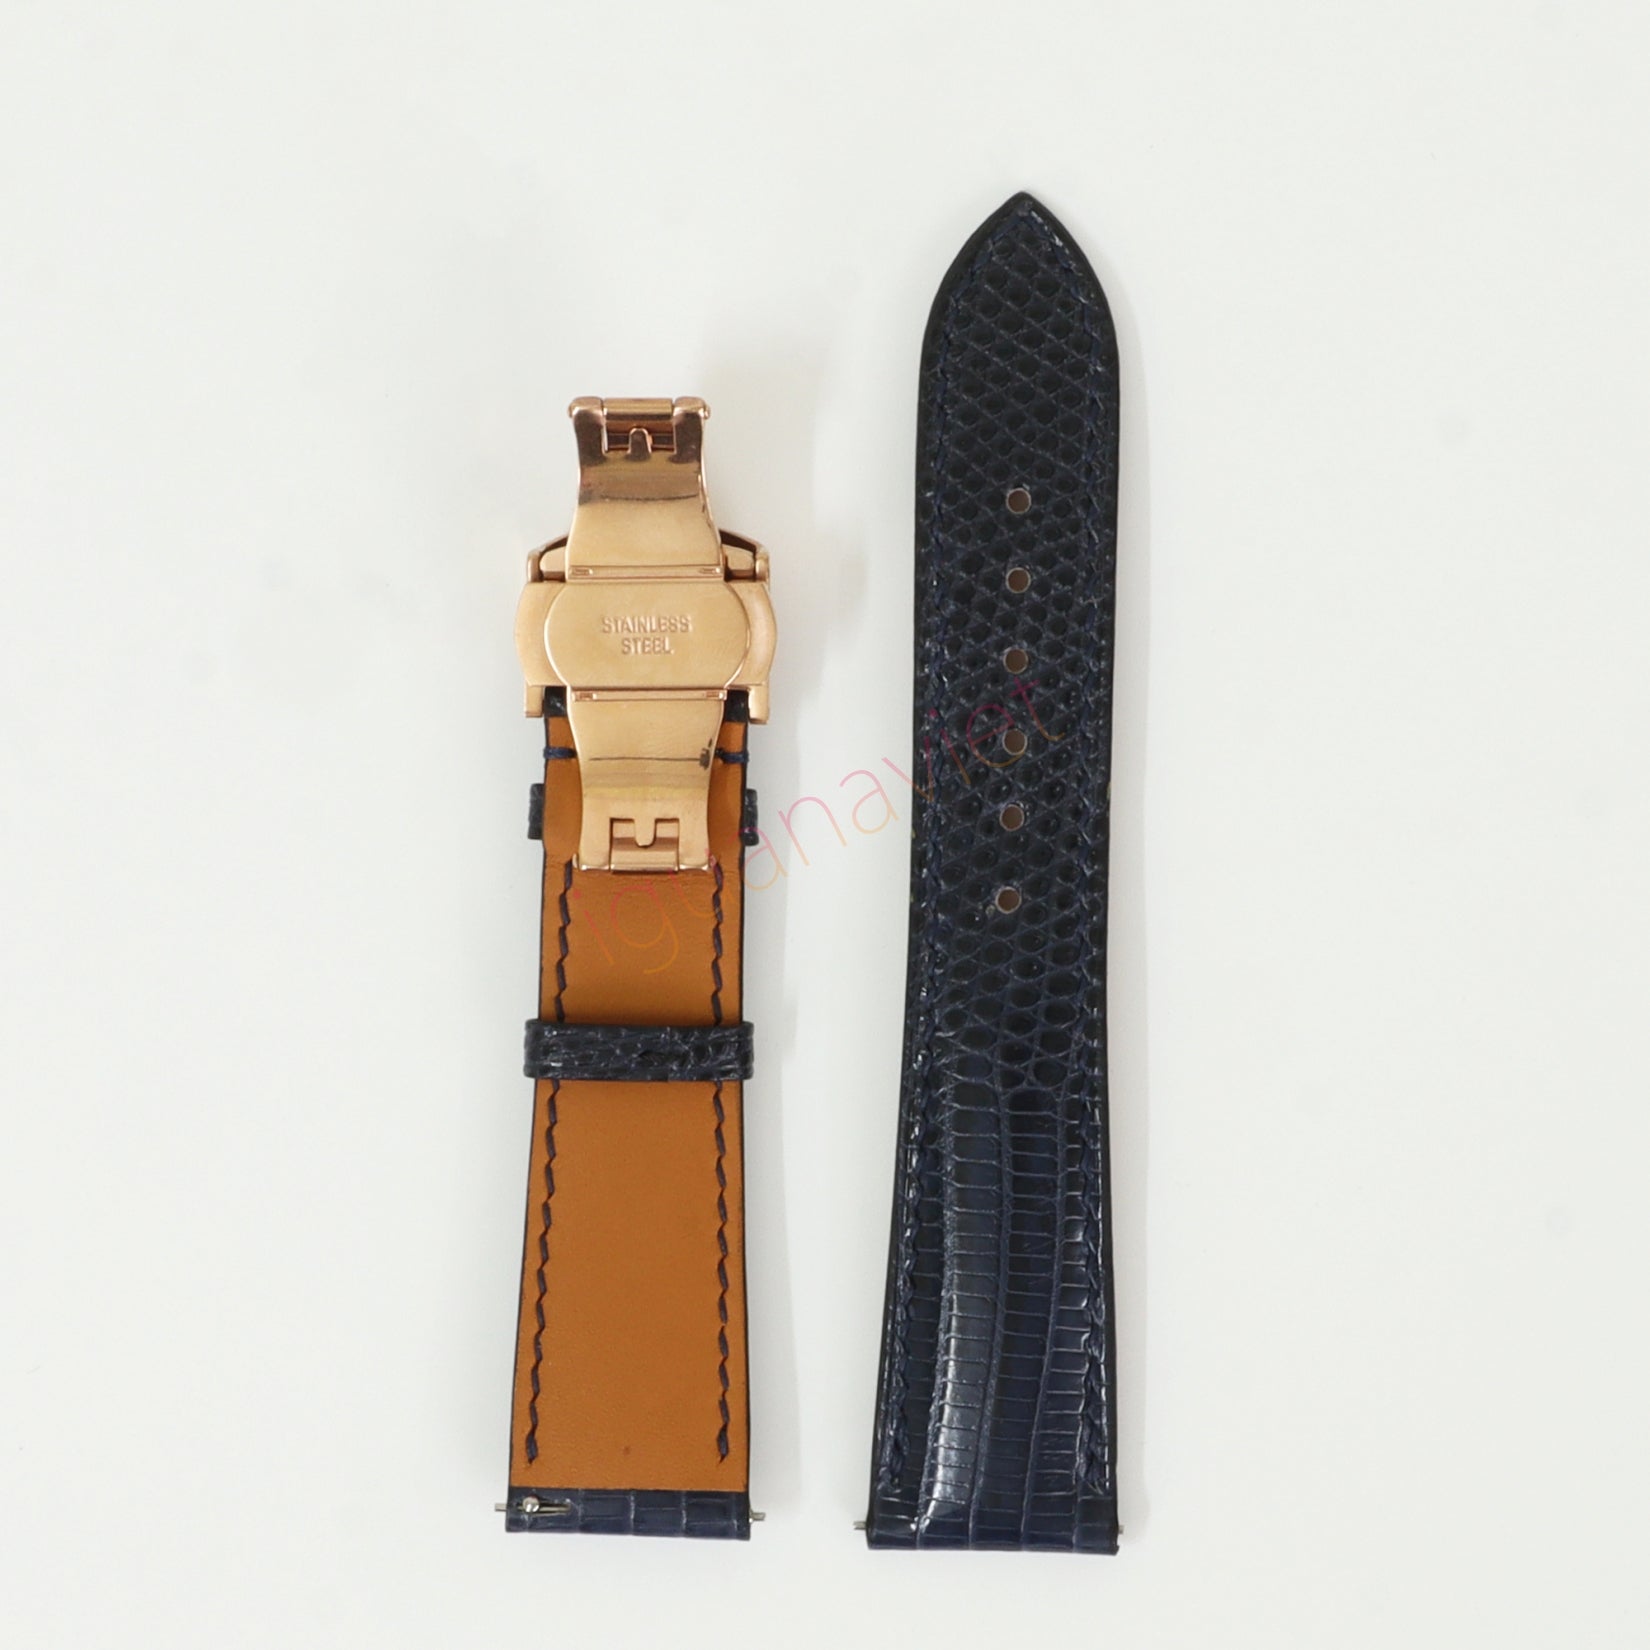 Genuine iguana leather watch strap with deployment buckle, quick release pin leather watch strap, handmade leather watch strap